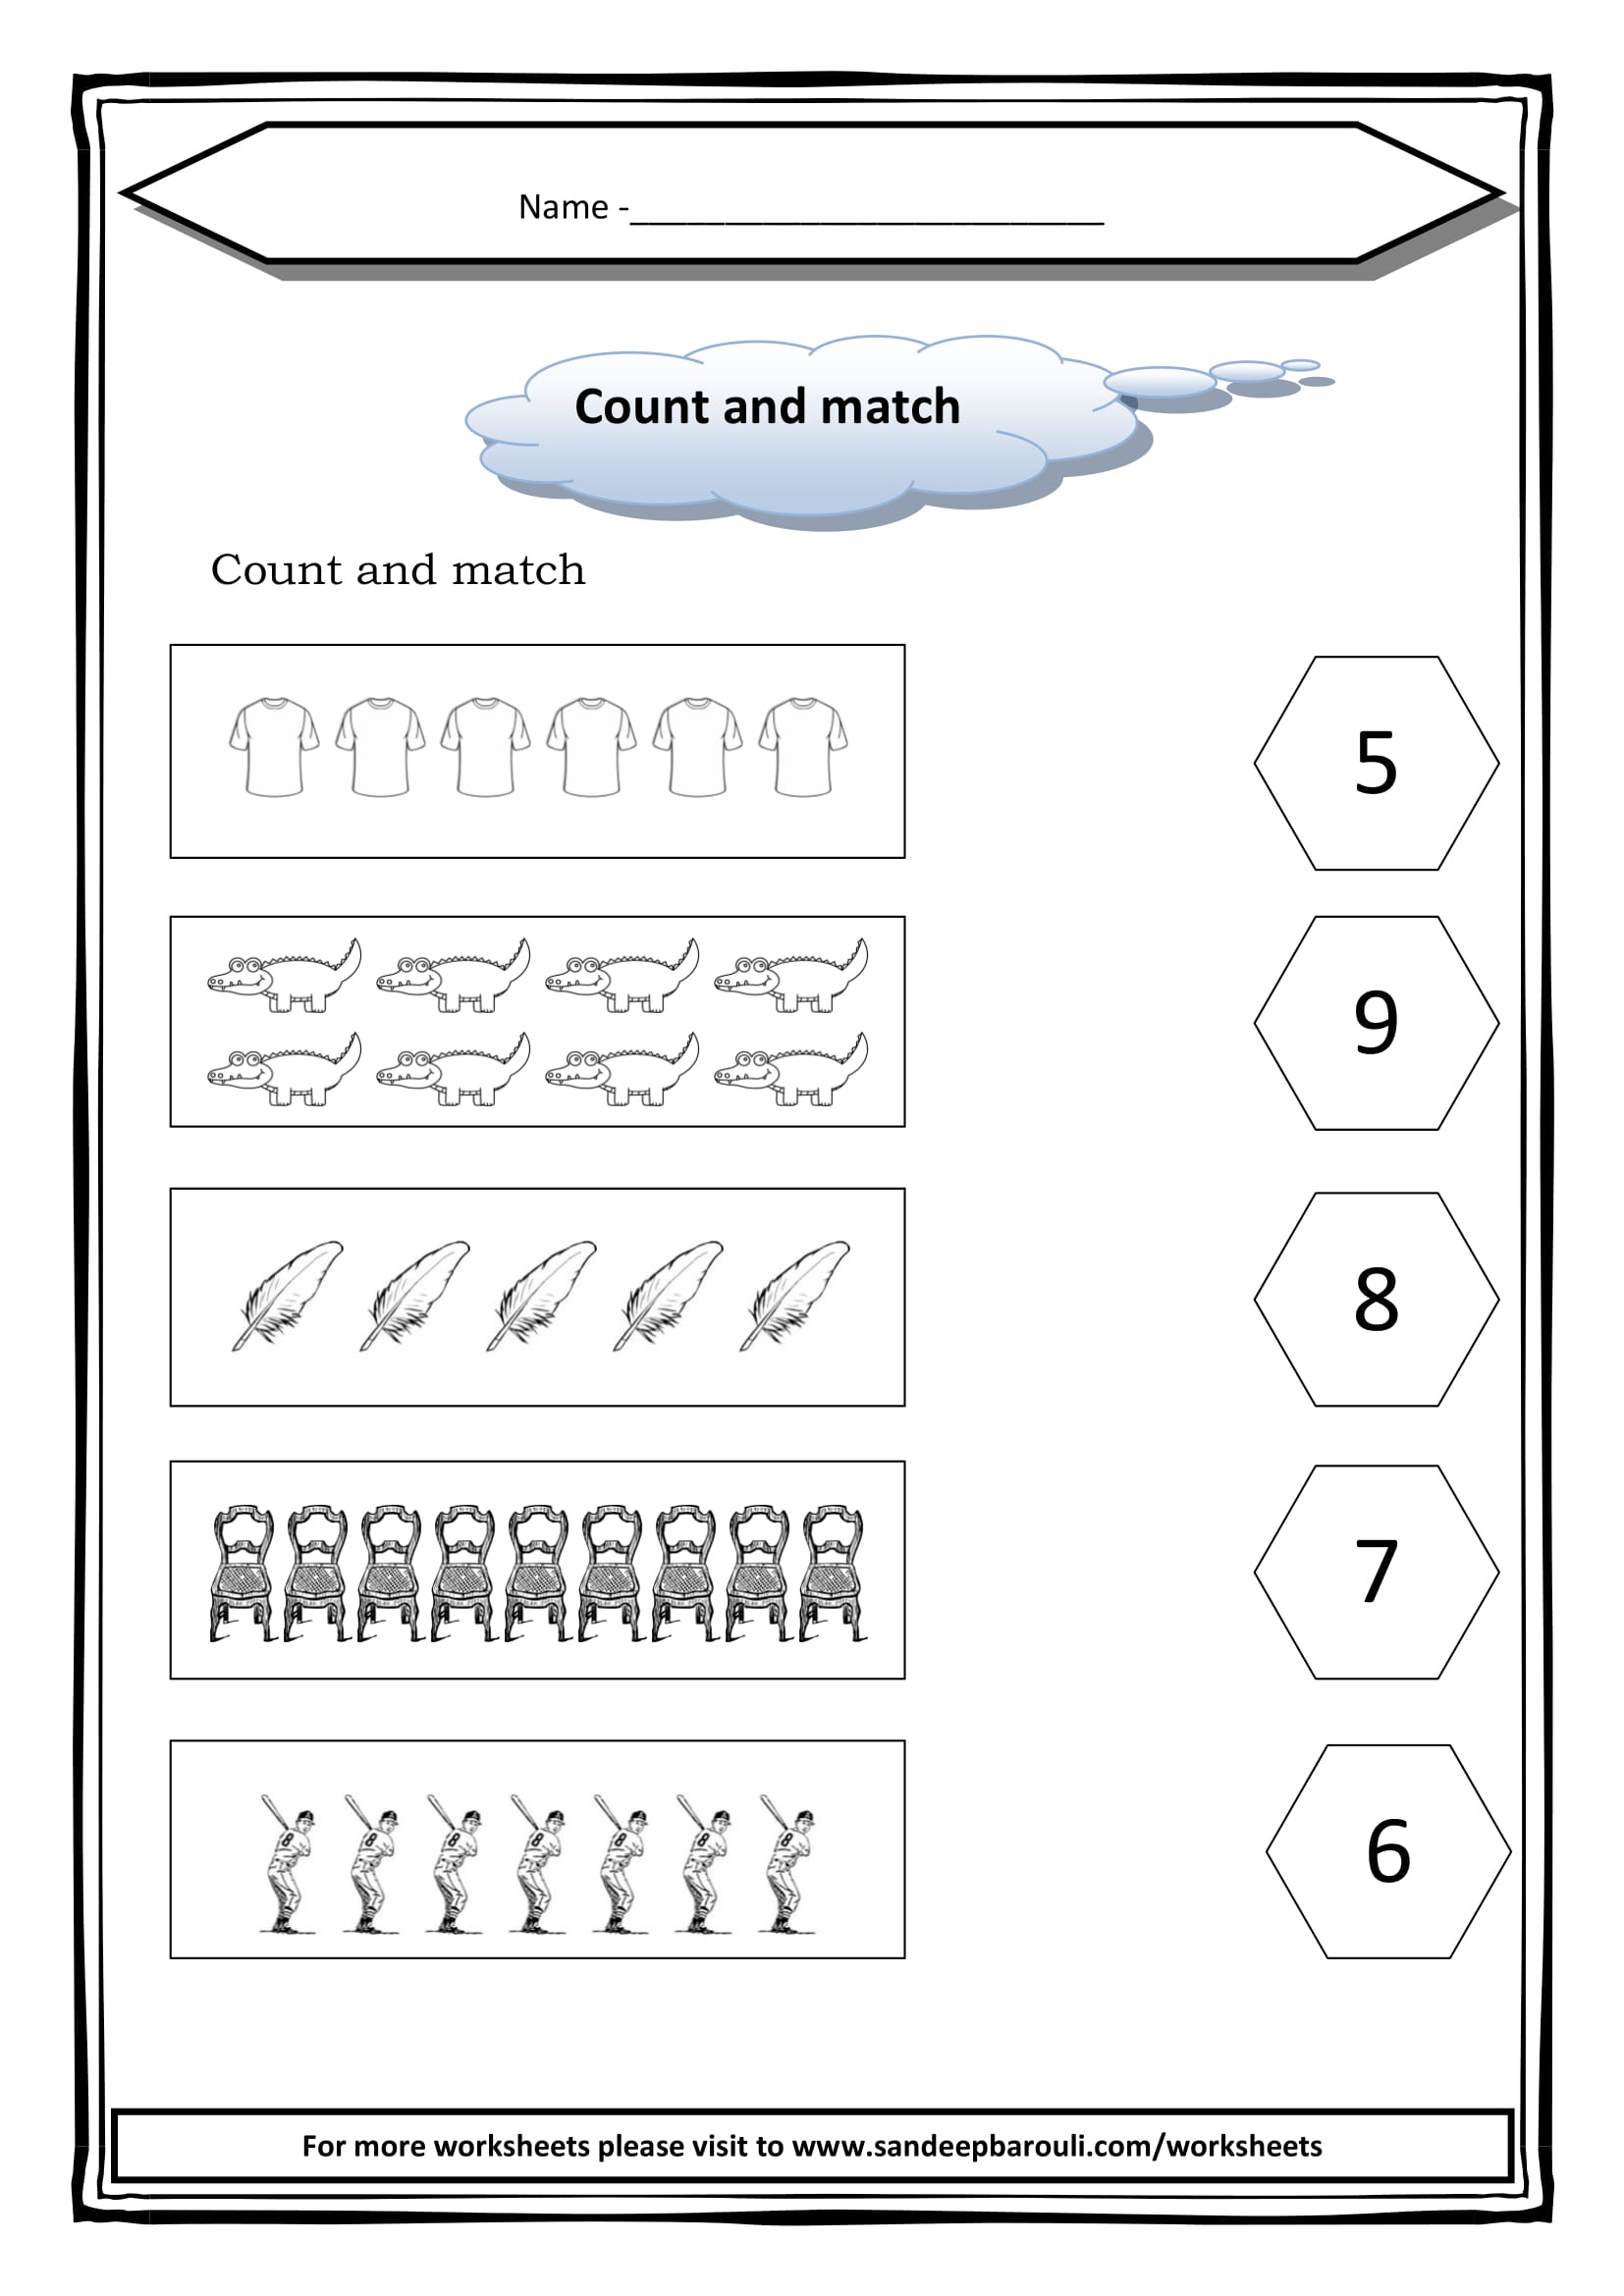 Count-and-match-4-Worksheet-for-class-1